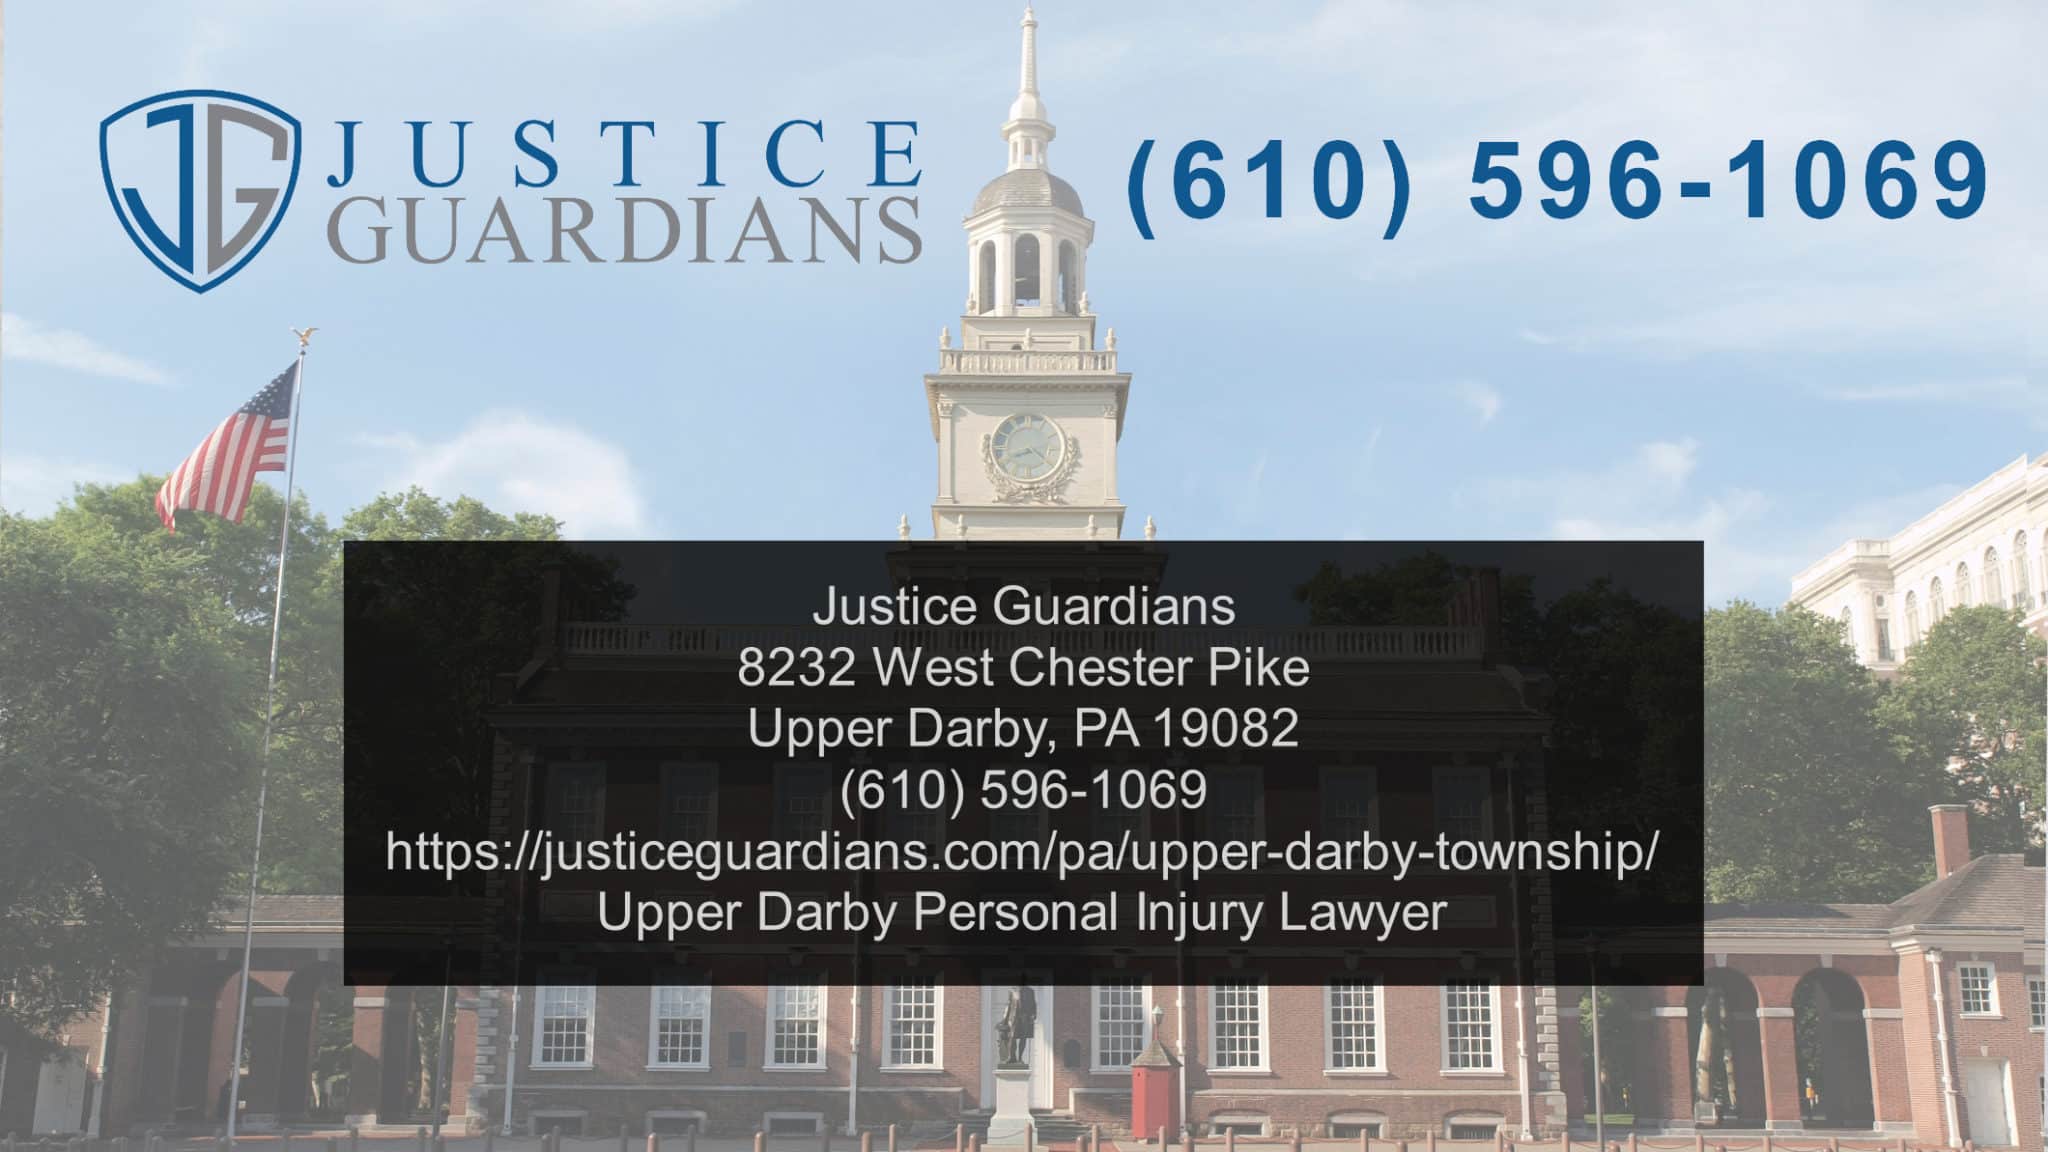 Car Accident Attorneys In Upper Darby Can Get Compensation For Injured Victims